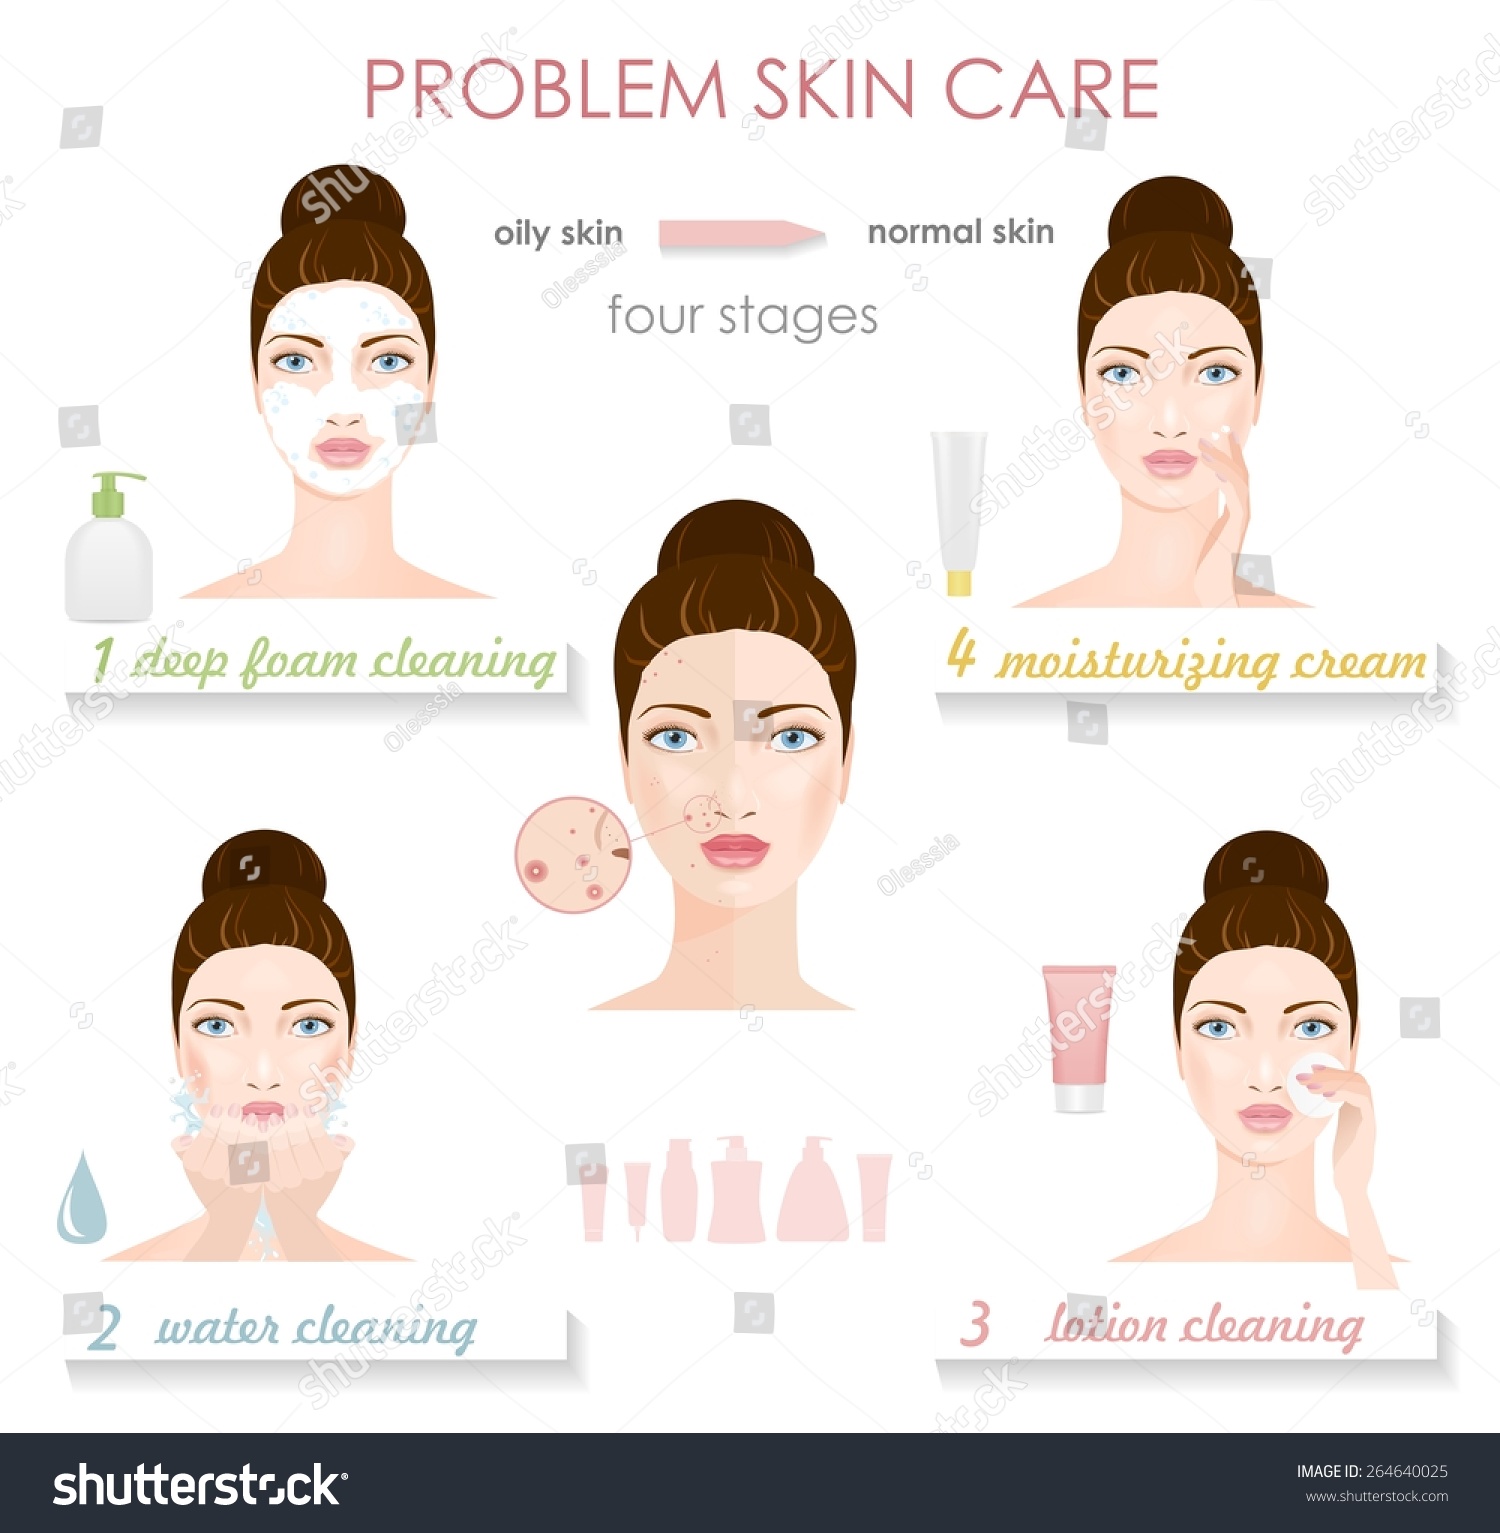 Four Stages Of Oily Skin Care. Vector - 264640025 : Shutterstock